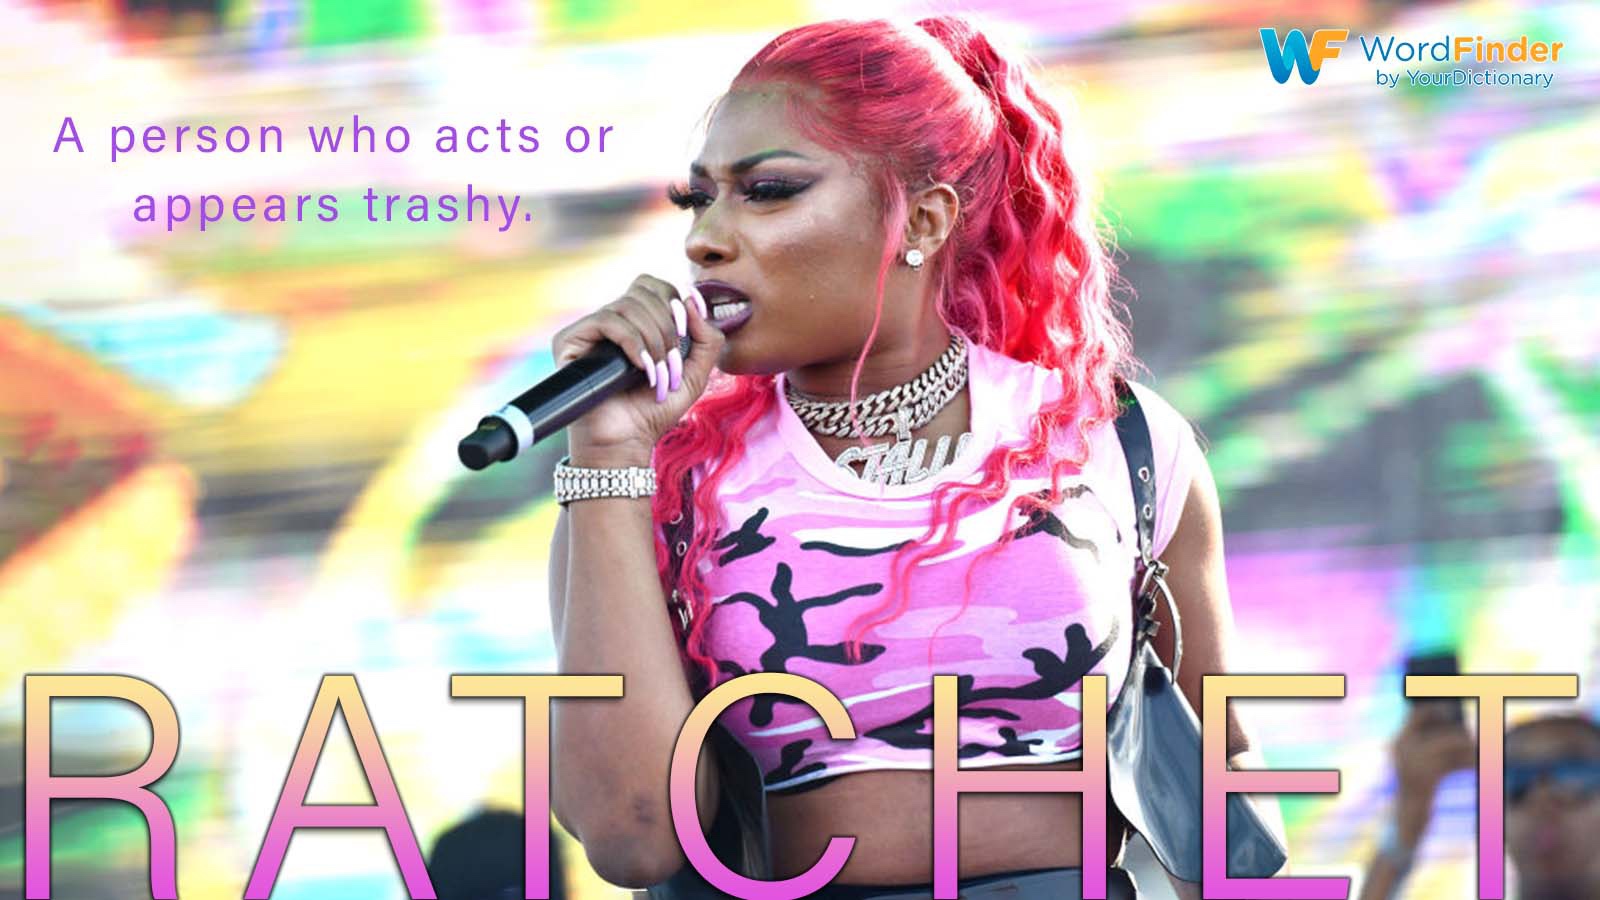 ratchet definition with Megan Thee Stallion